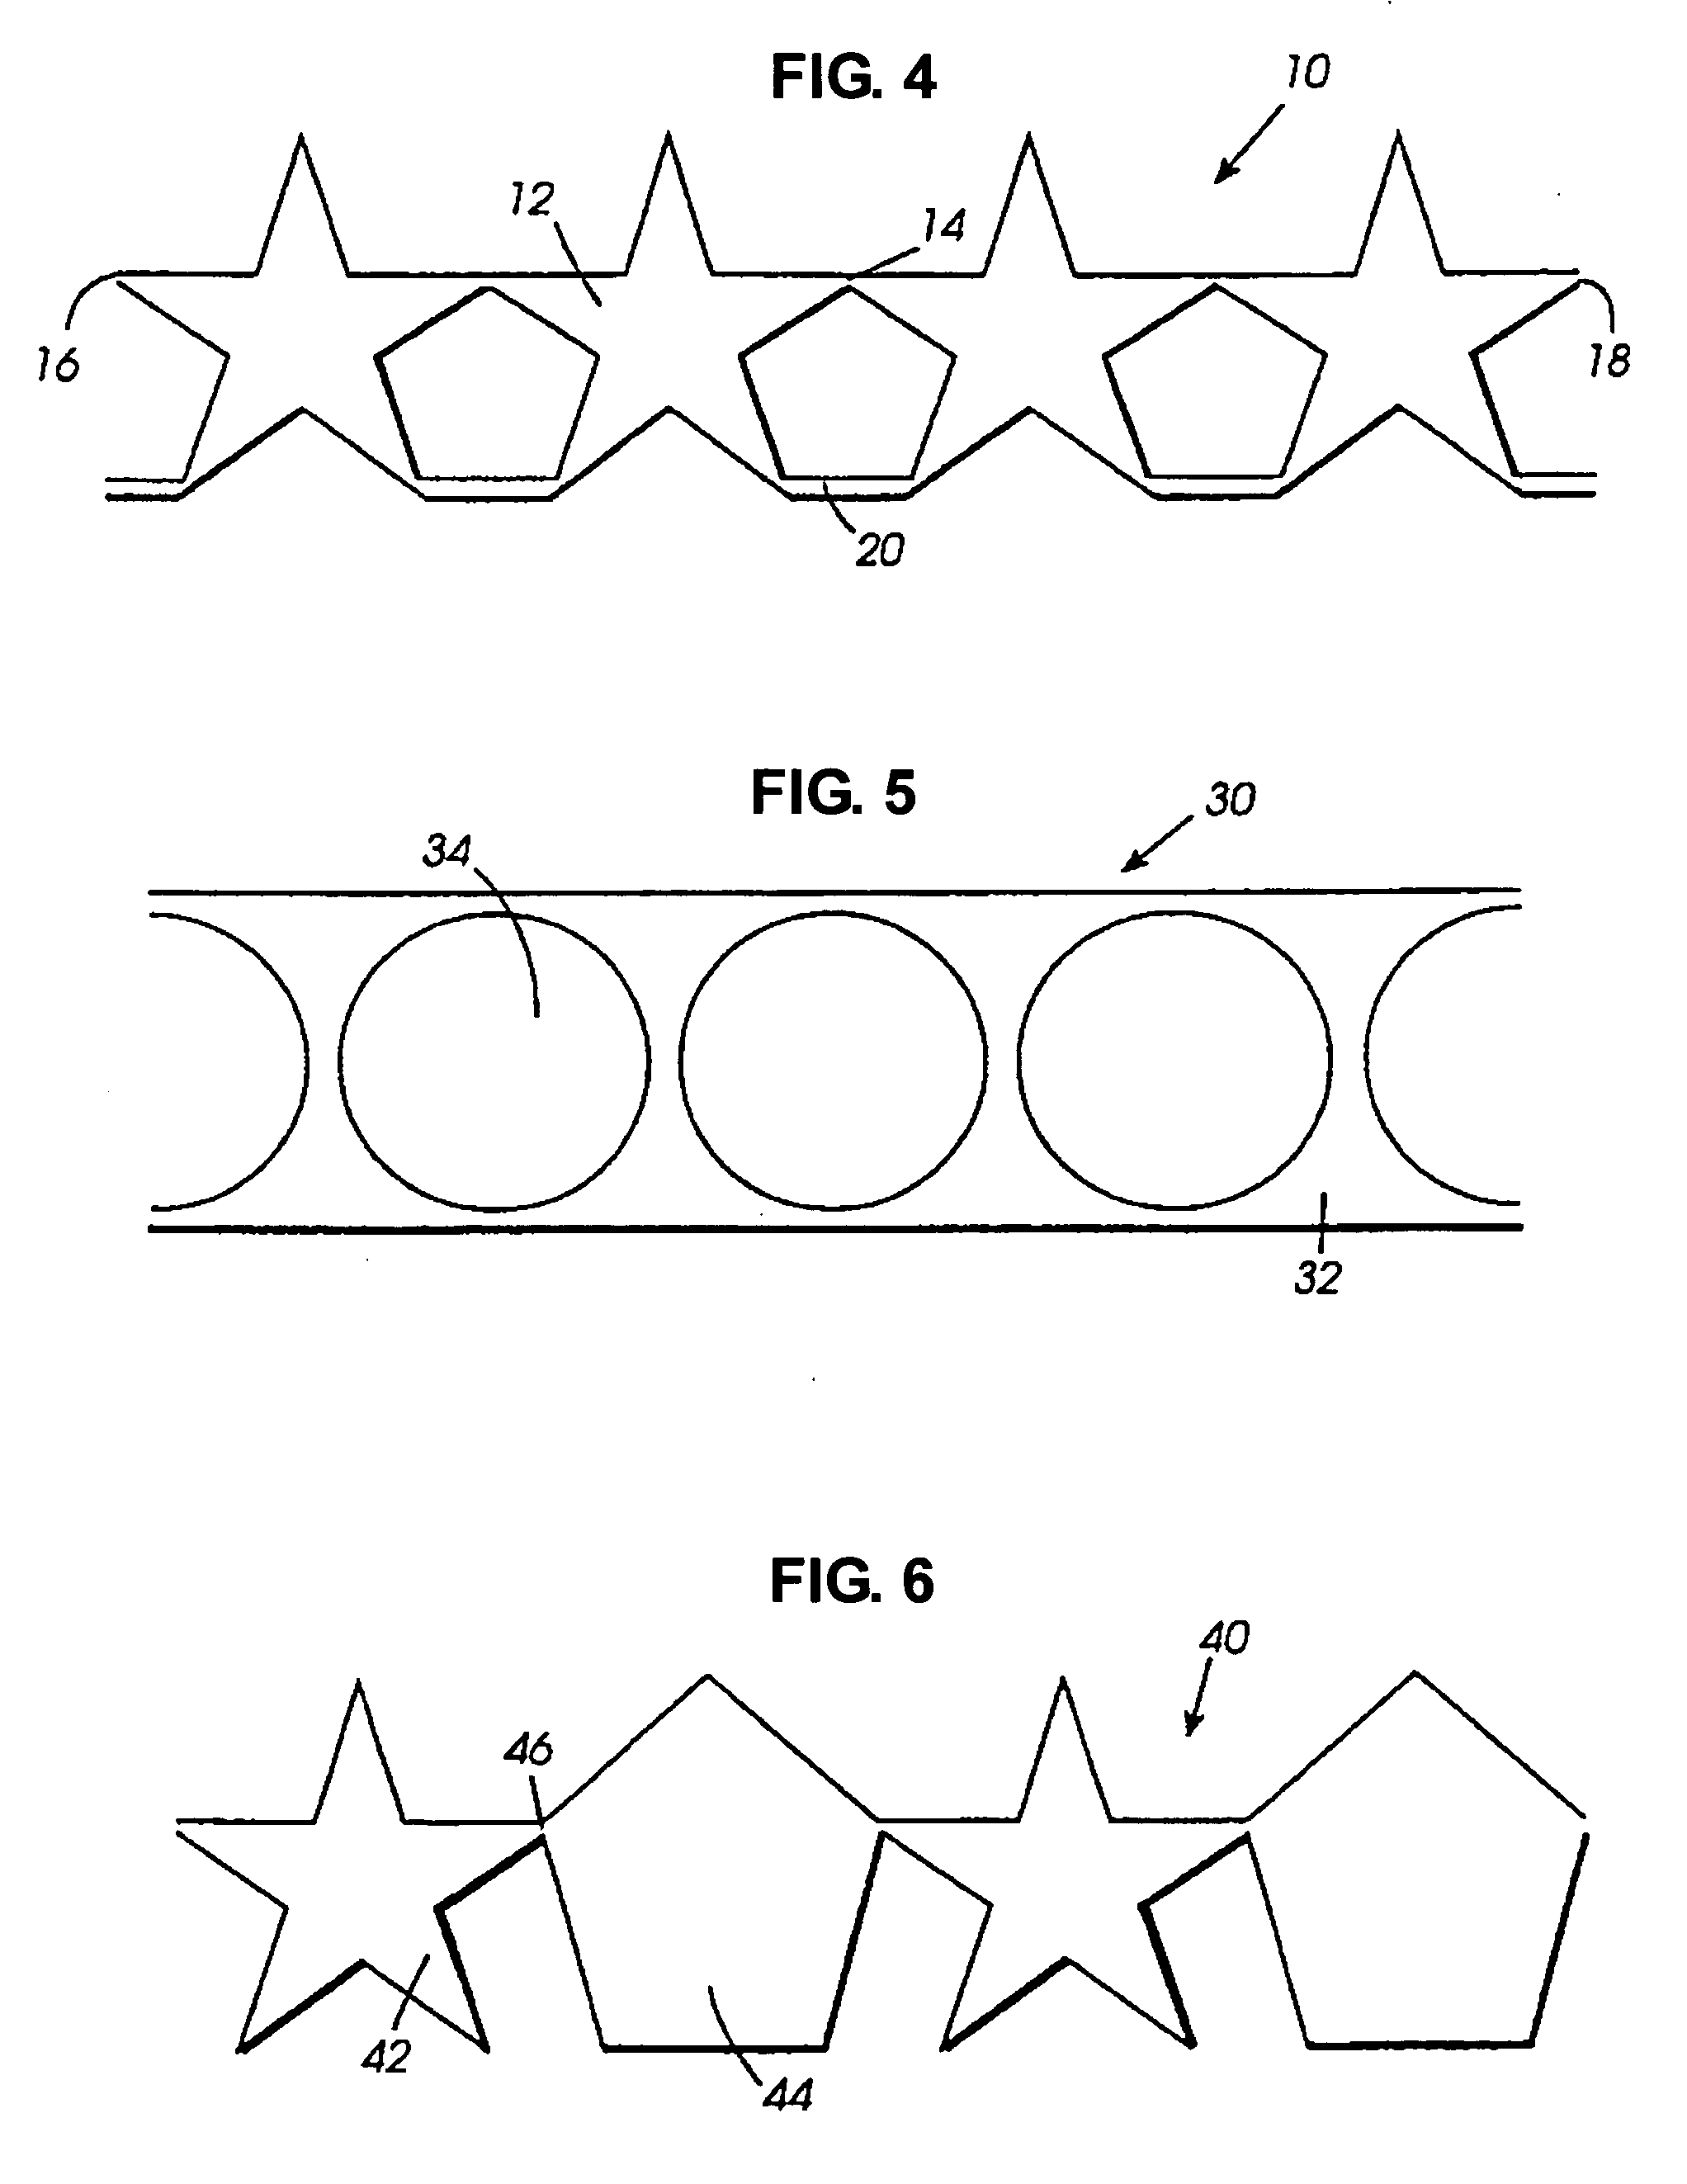 Continuous balloon structures - 2